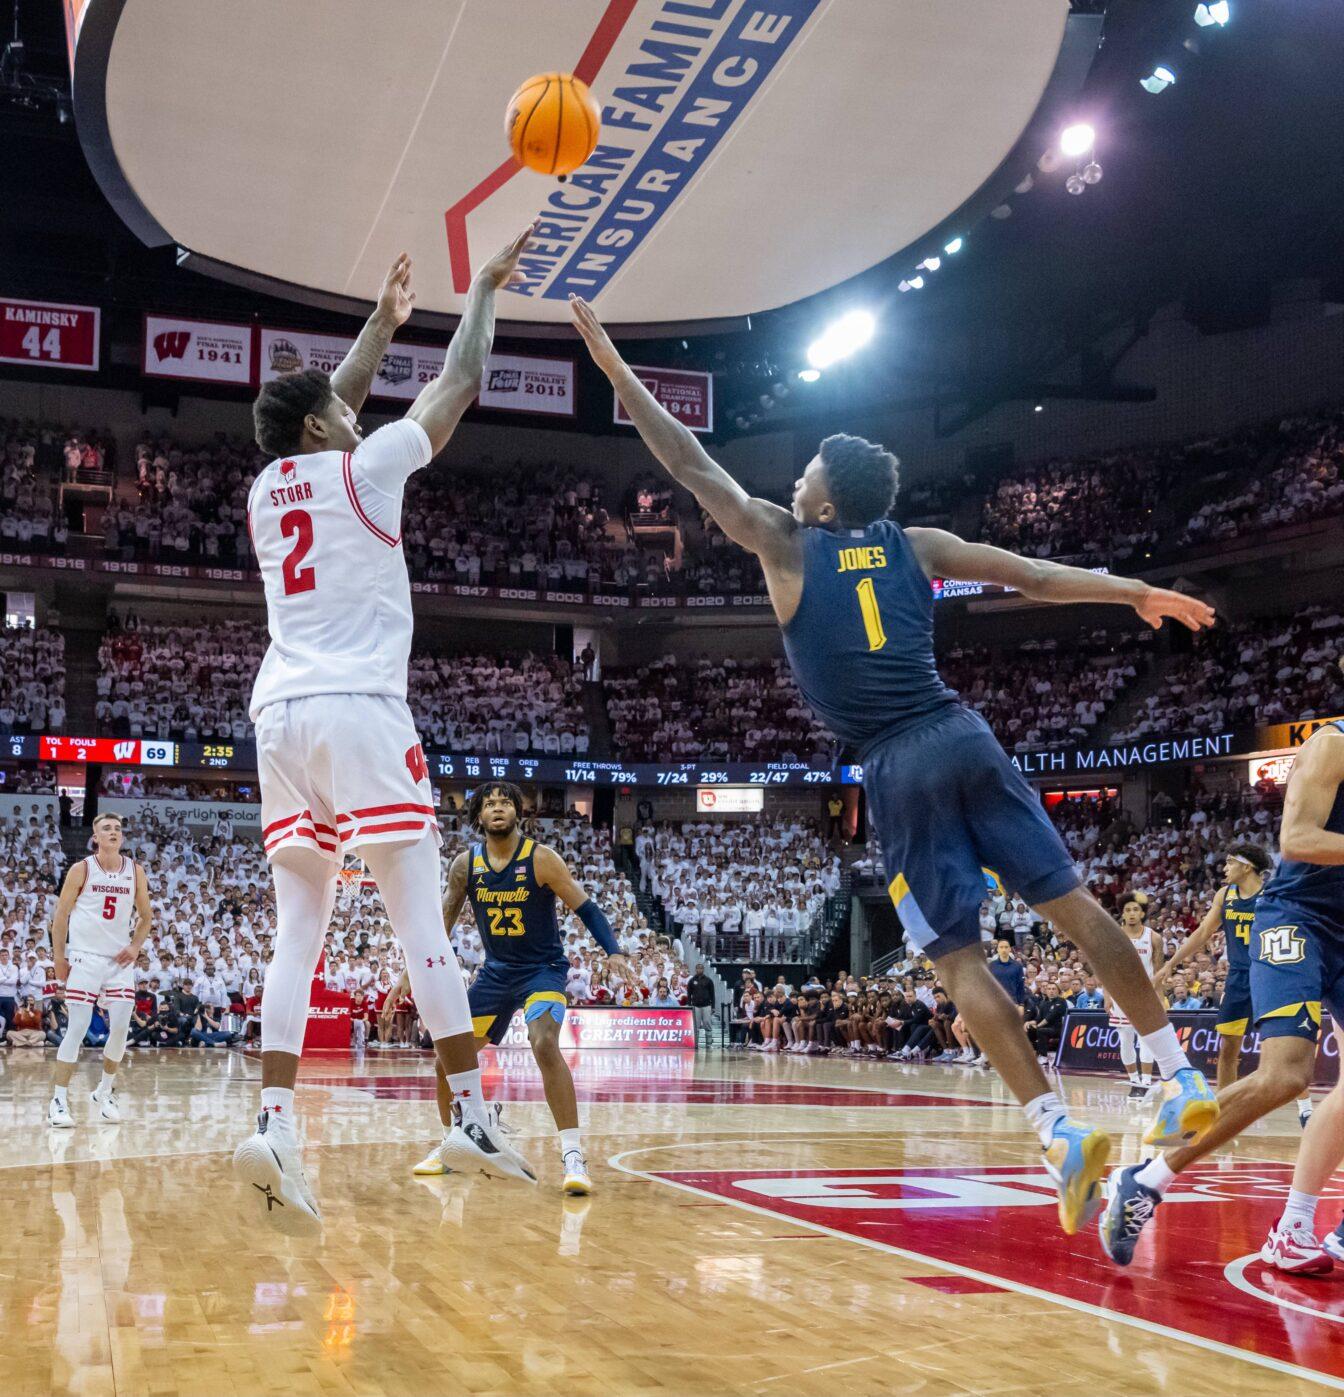 Badgers+stun+No.+3+Marquette%2C+claim+third+straight+victory+over+Golden+Eagles